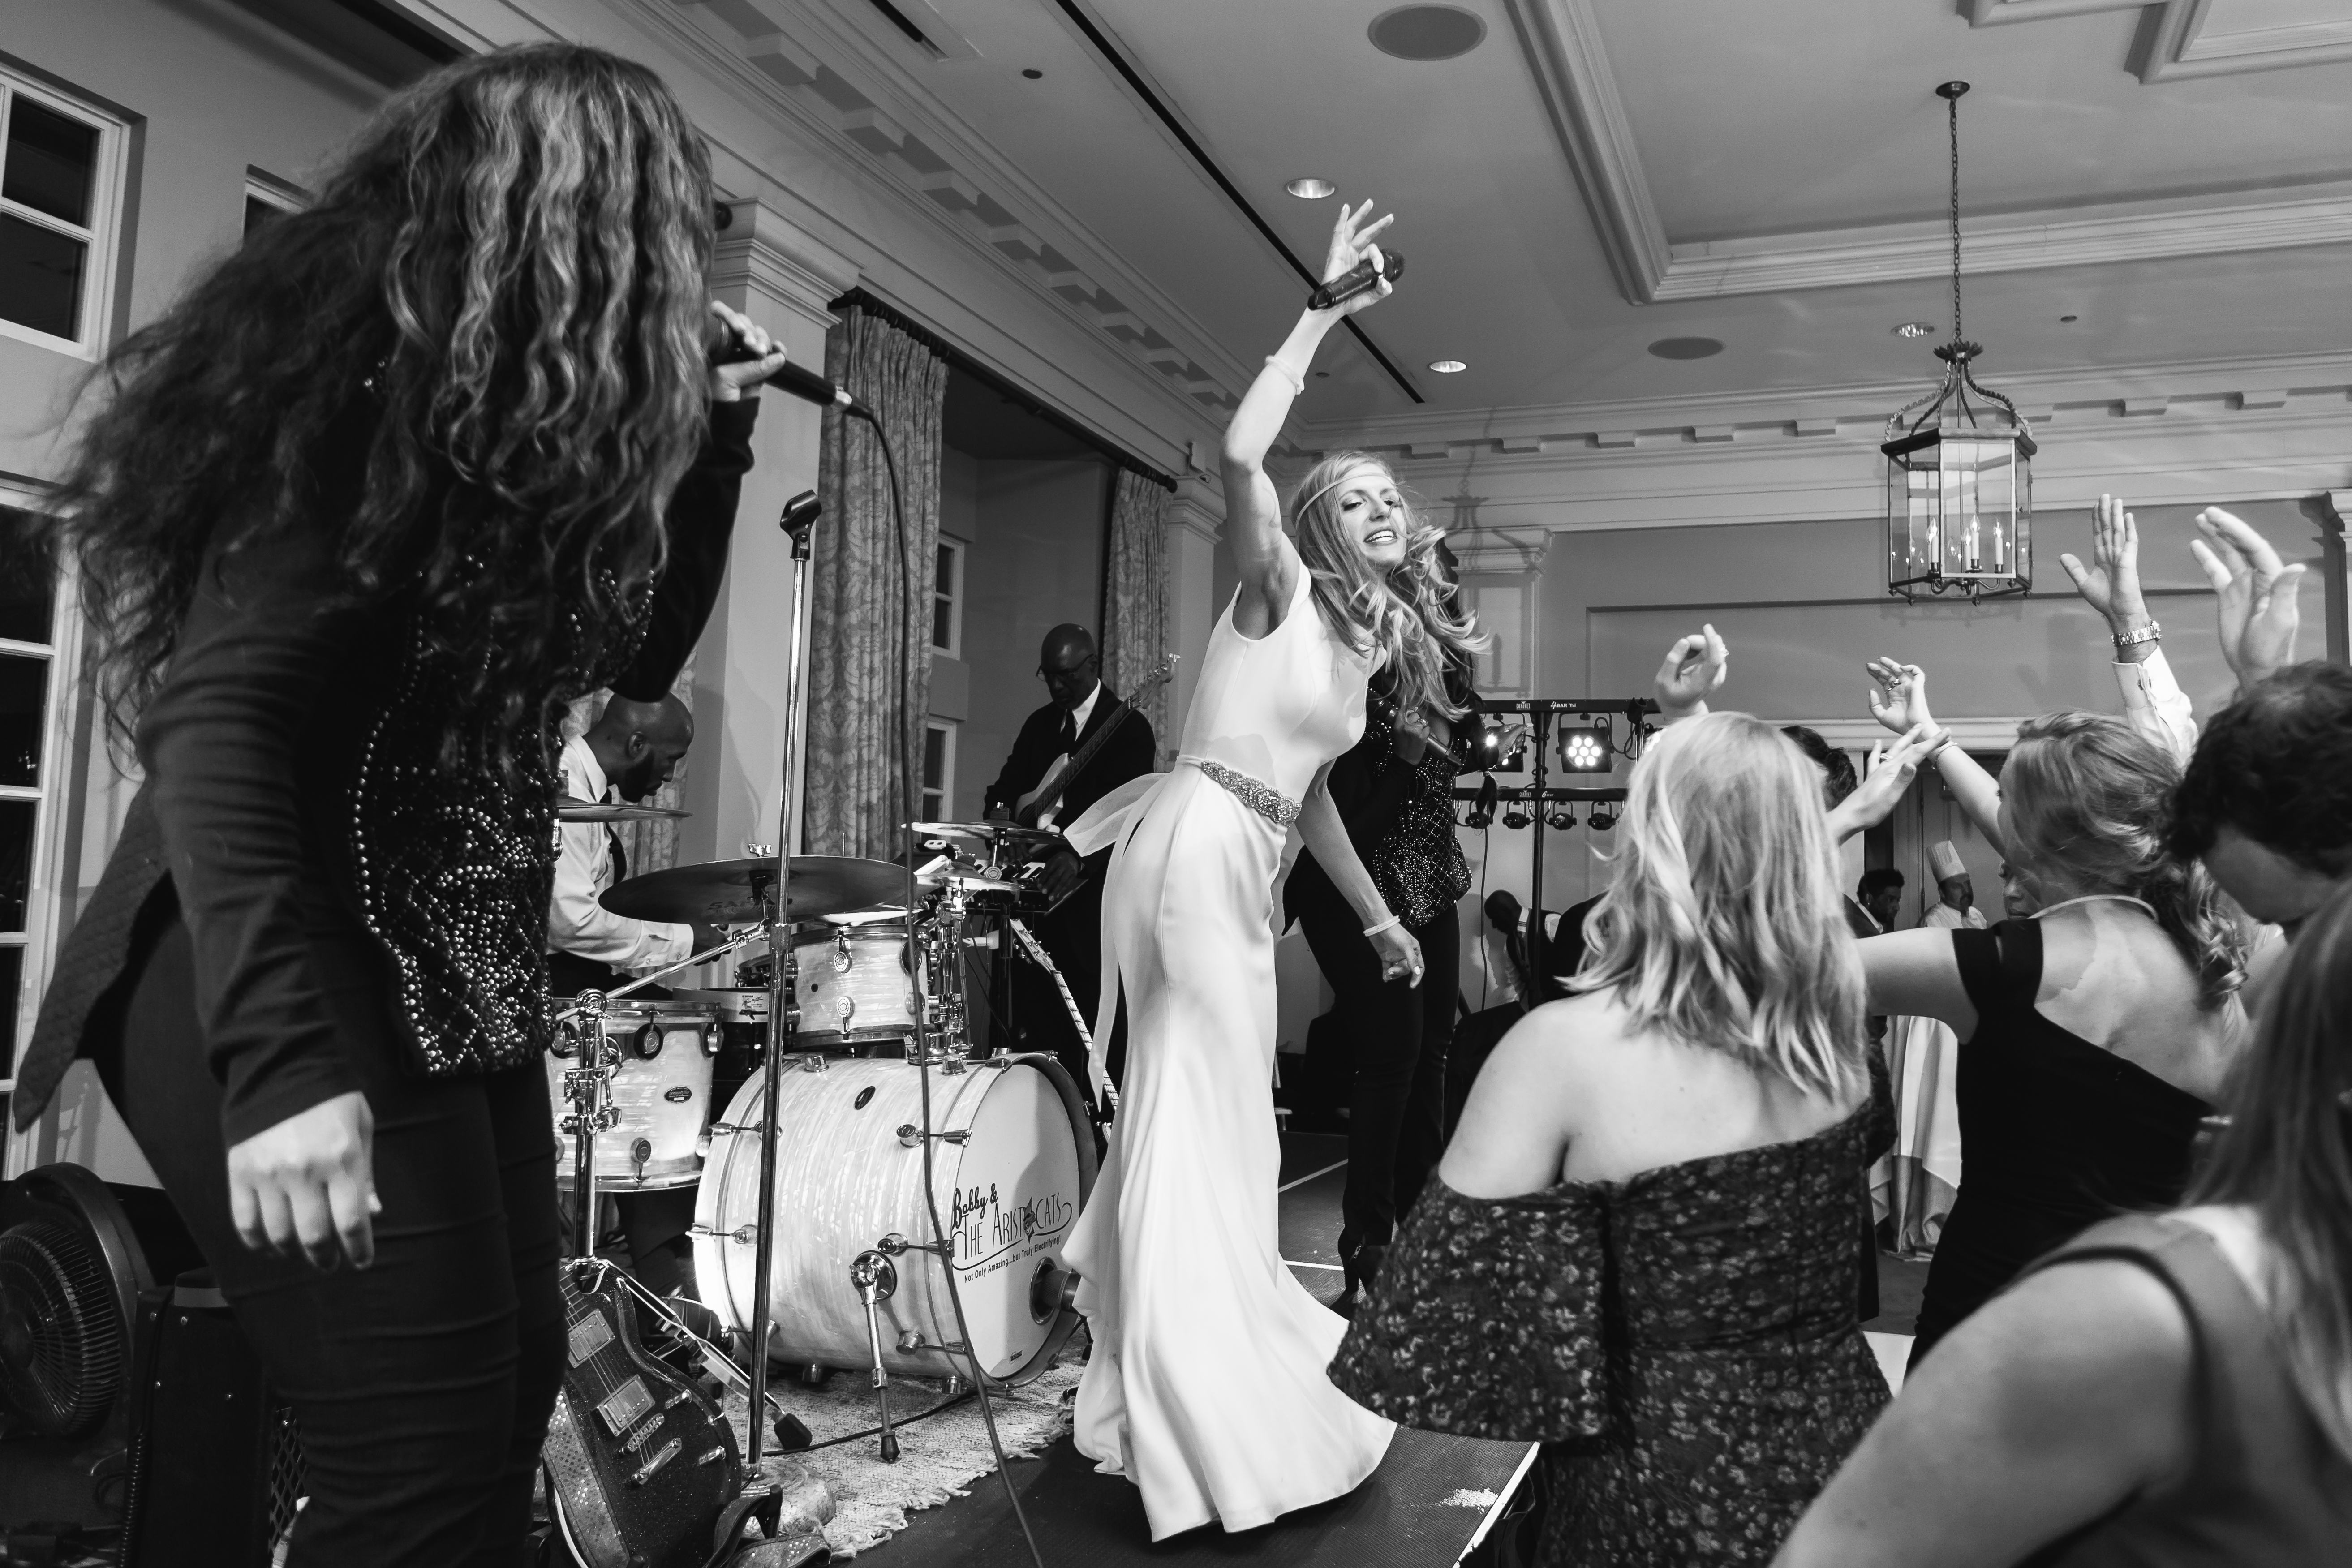 Stephanie lives out her rock star dreams on stage as she sings alongside Bobby and the Aristocrats with East Coast Entertainment. Photo by top Atlanta Photographer Rebecca Cerasani.